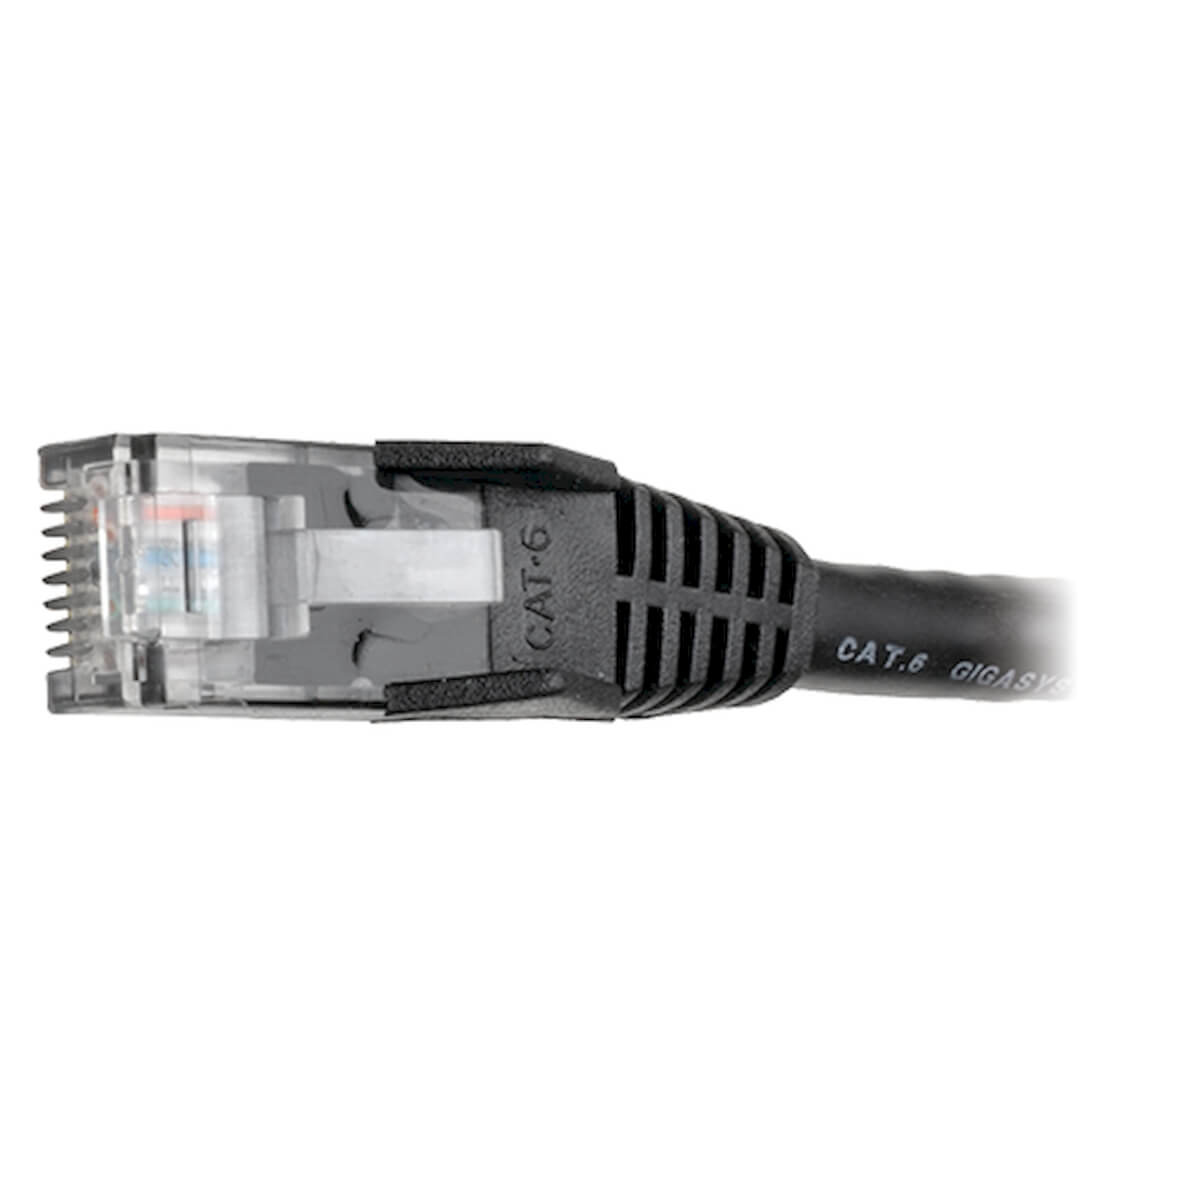 RJ45-4ft-White Shielded Mini CAT6A Ethernet Patch Cable S/FTP RJ45 10G Snagless Molded Boot 